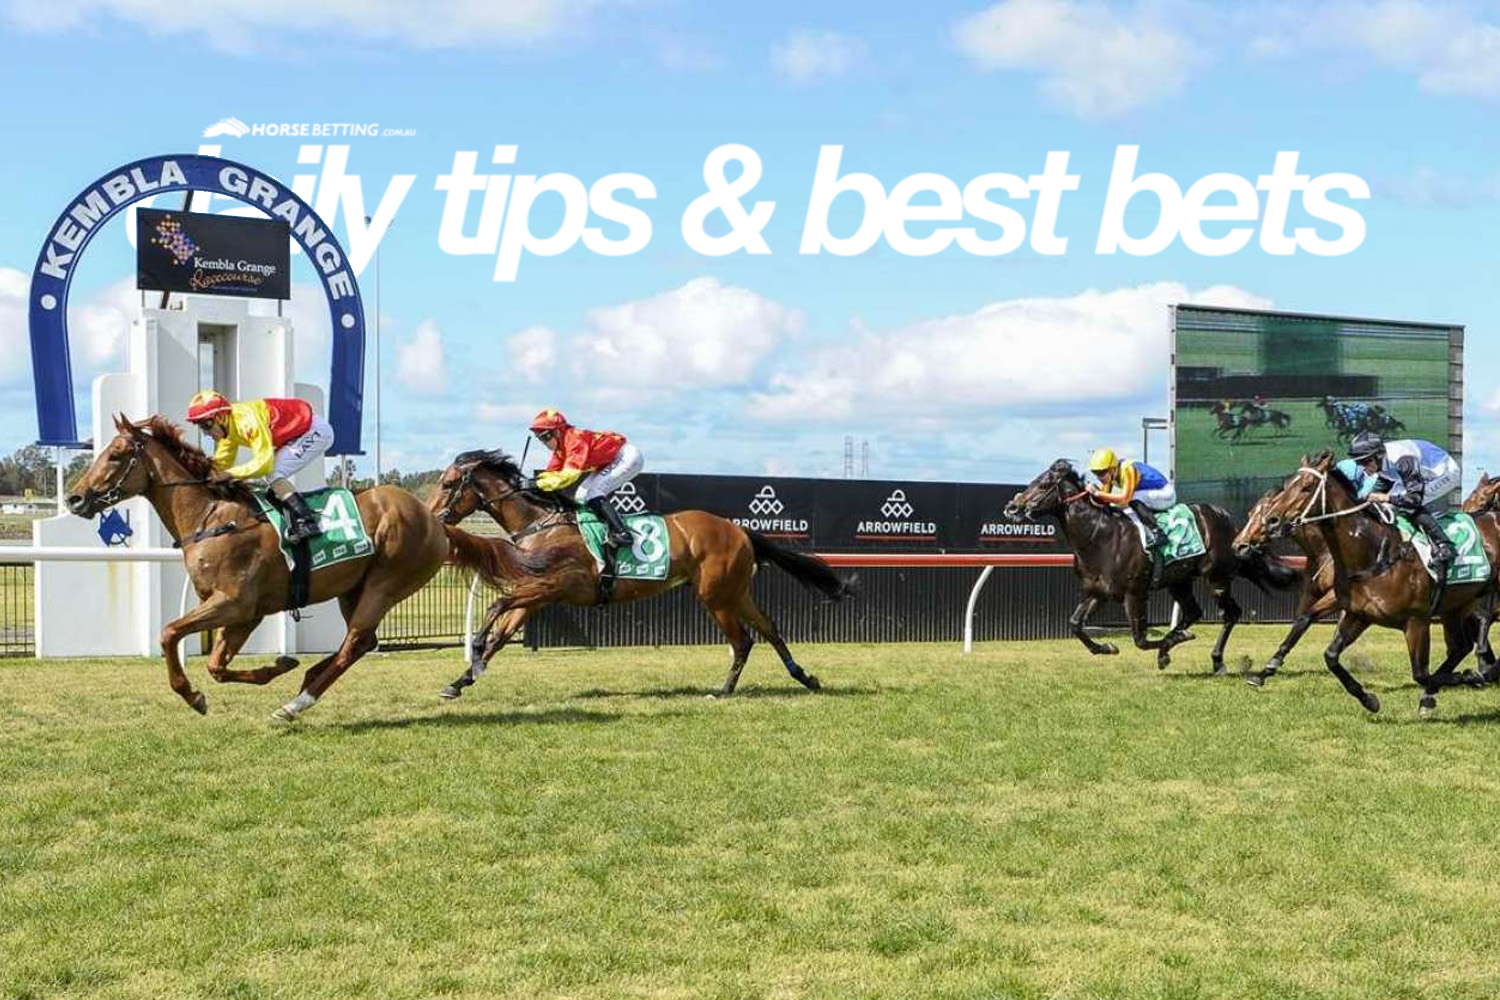 Tuesday horse racing tips & best bets